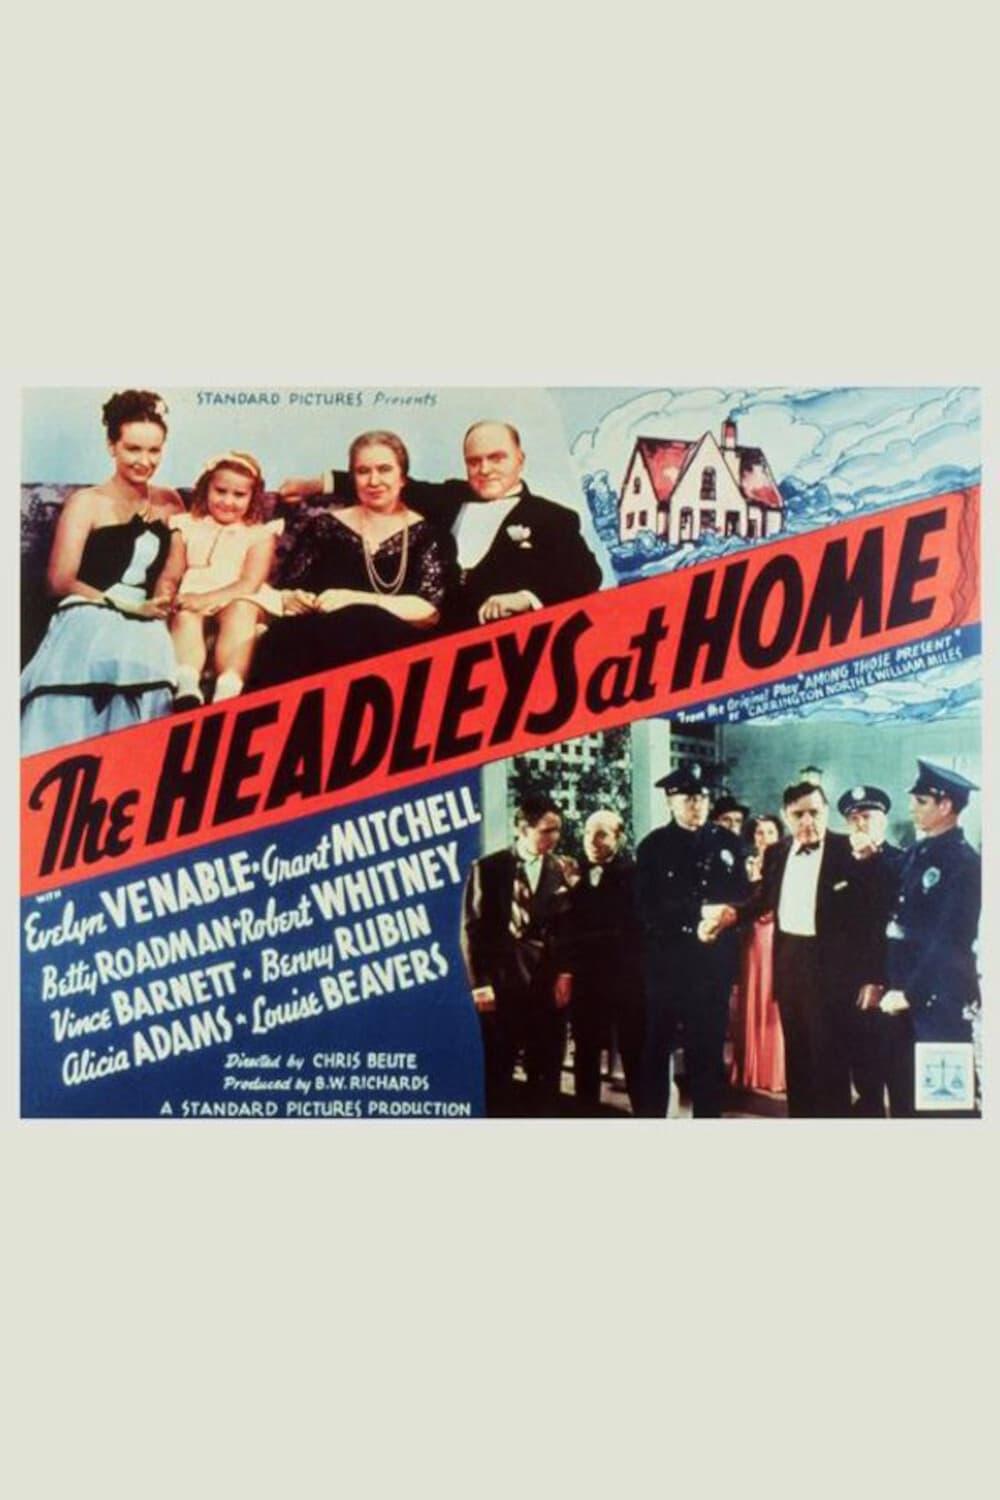 The Headleys at Home poster